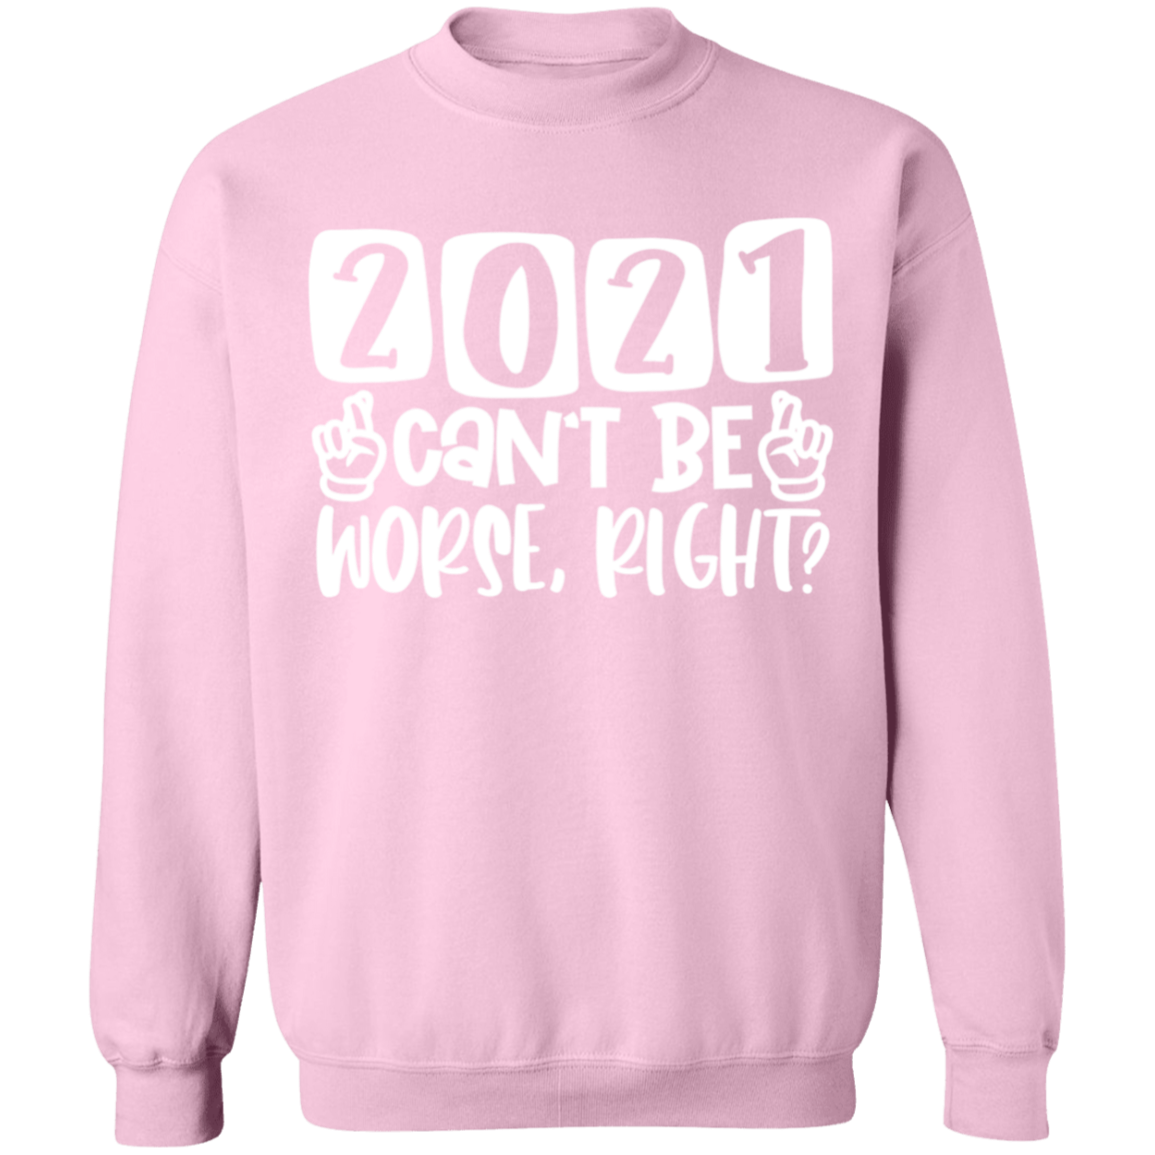 2021 Can't Be Worse Right Sweatshirt